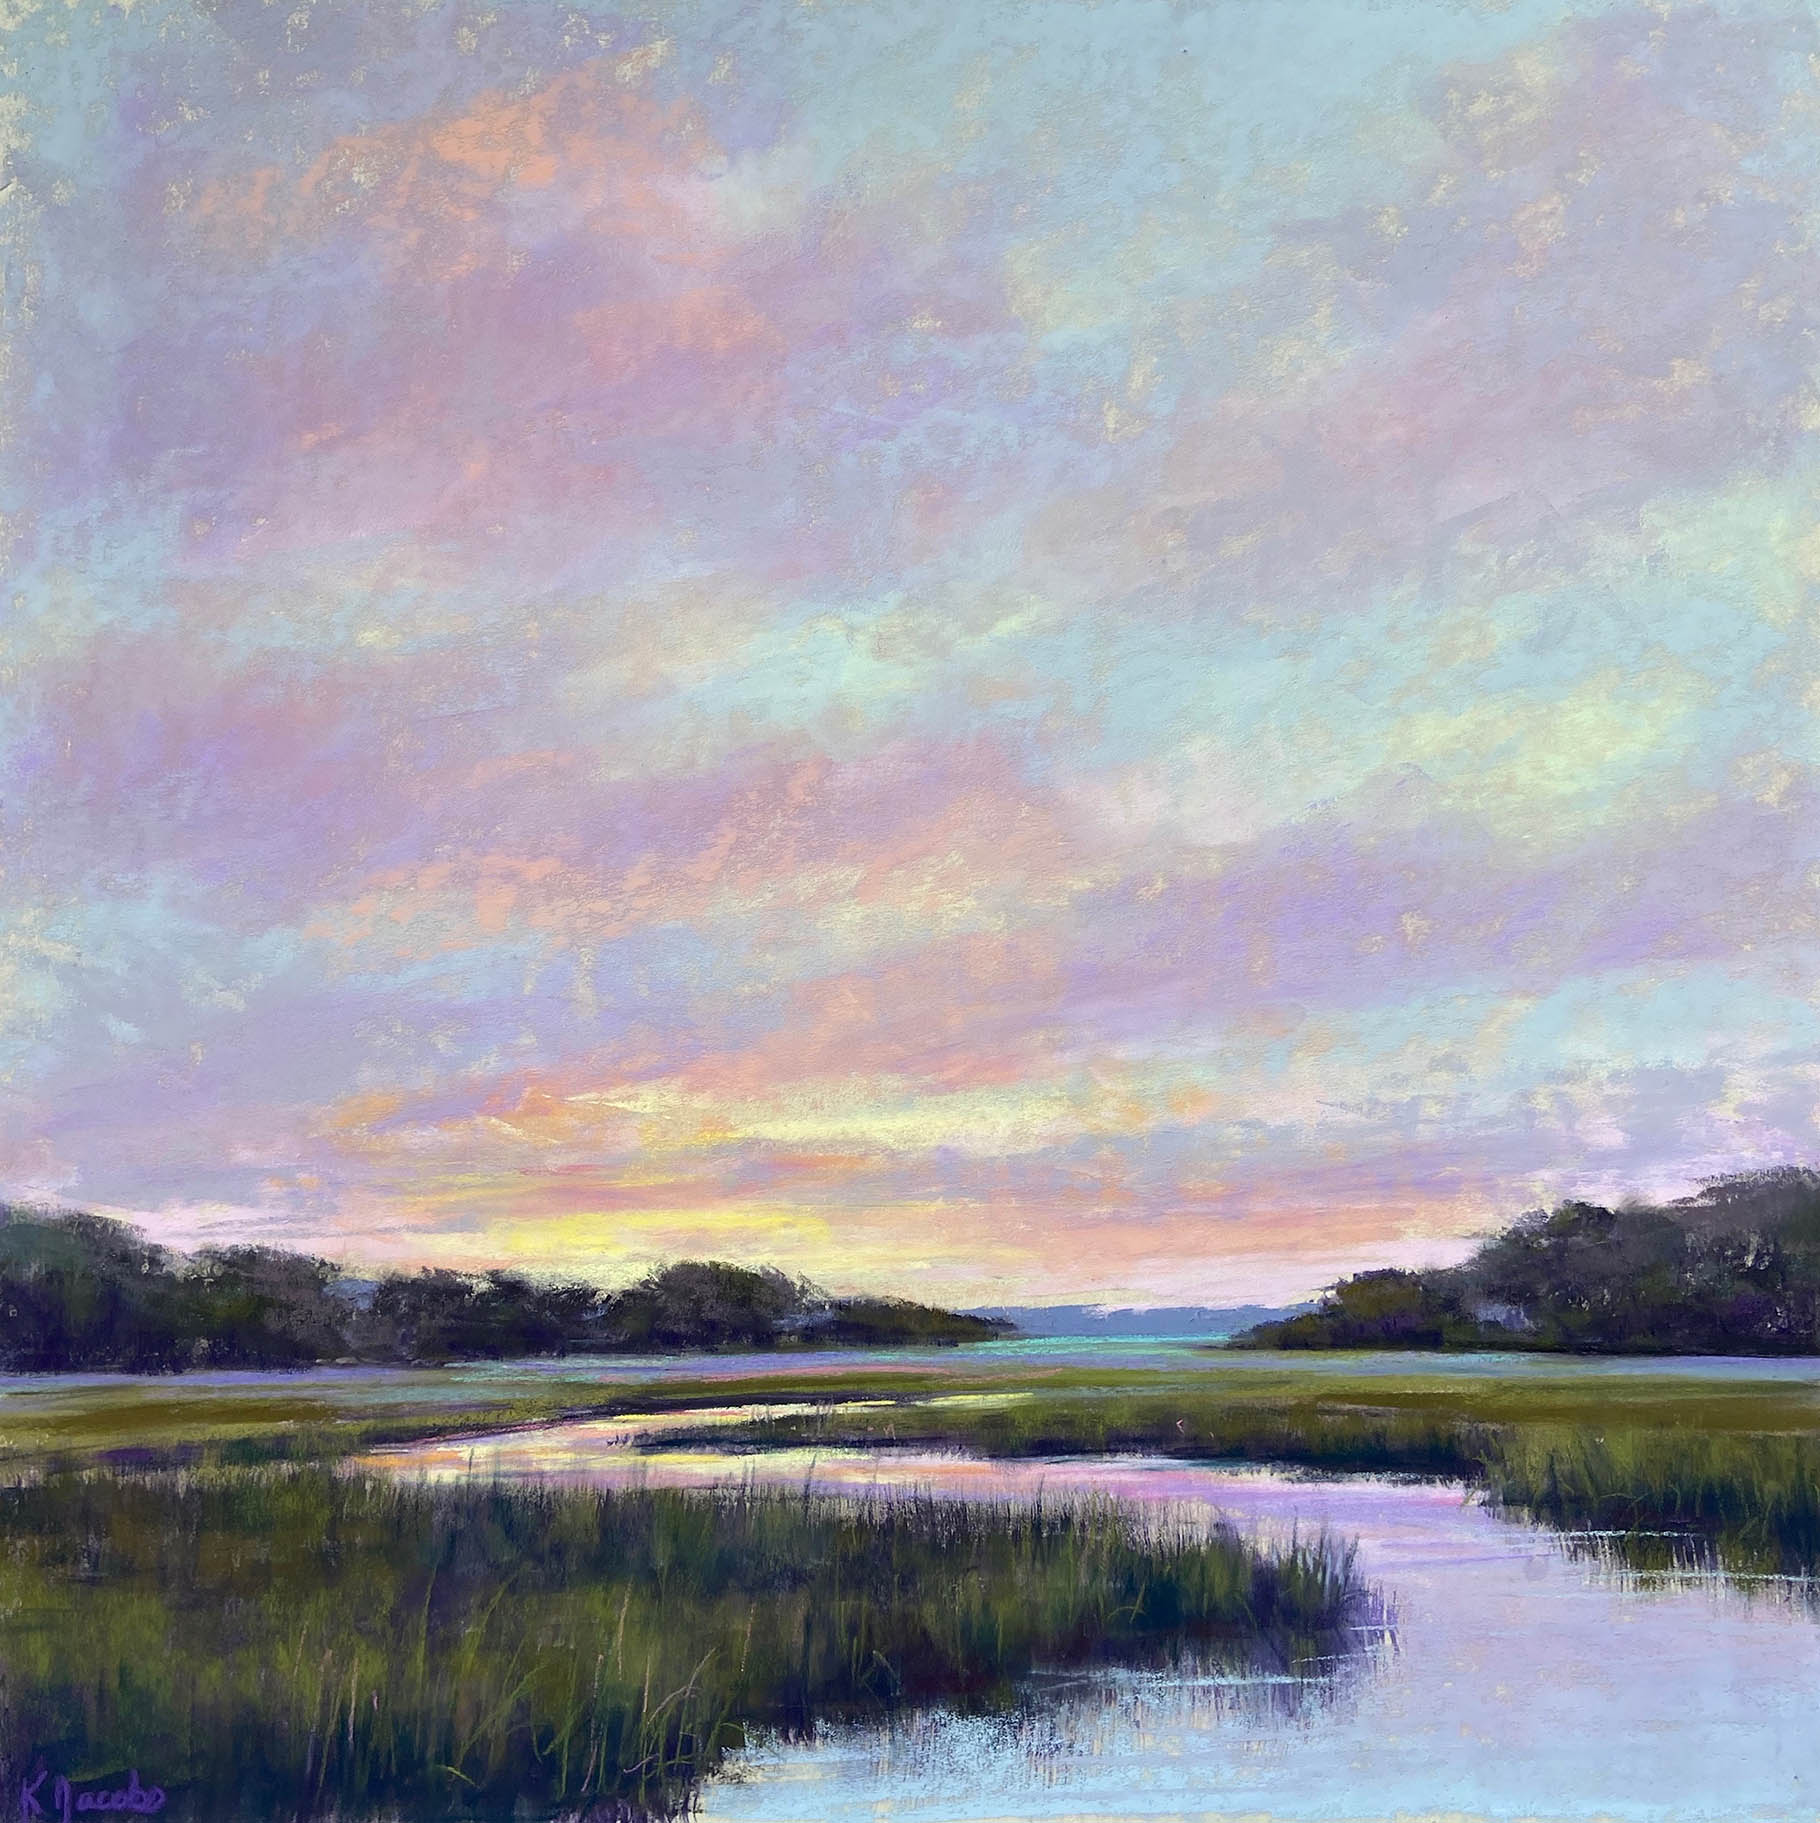 Kellie Jacobs, Reflections at Dusk